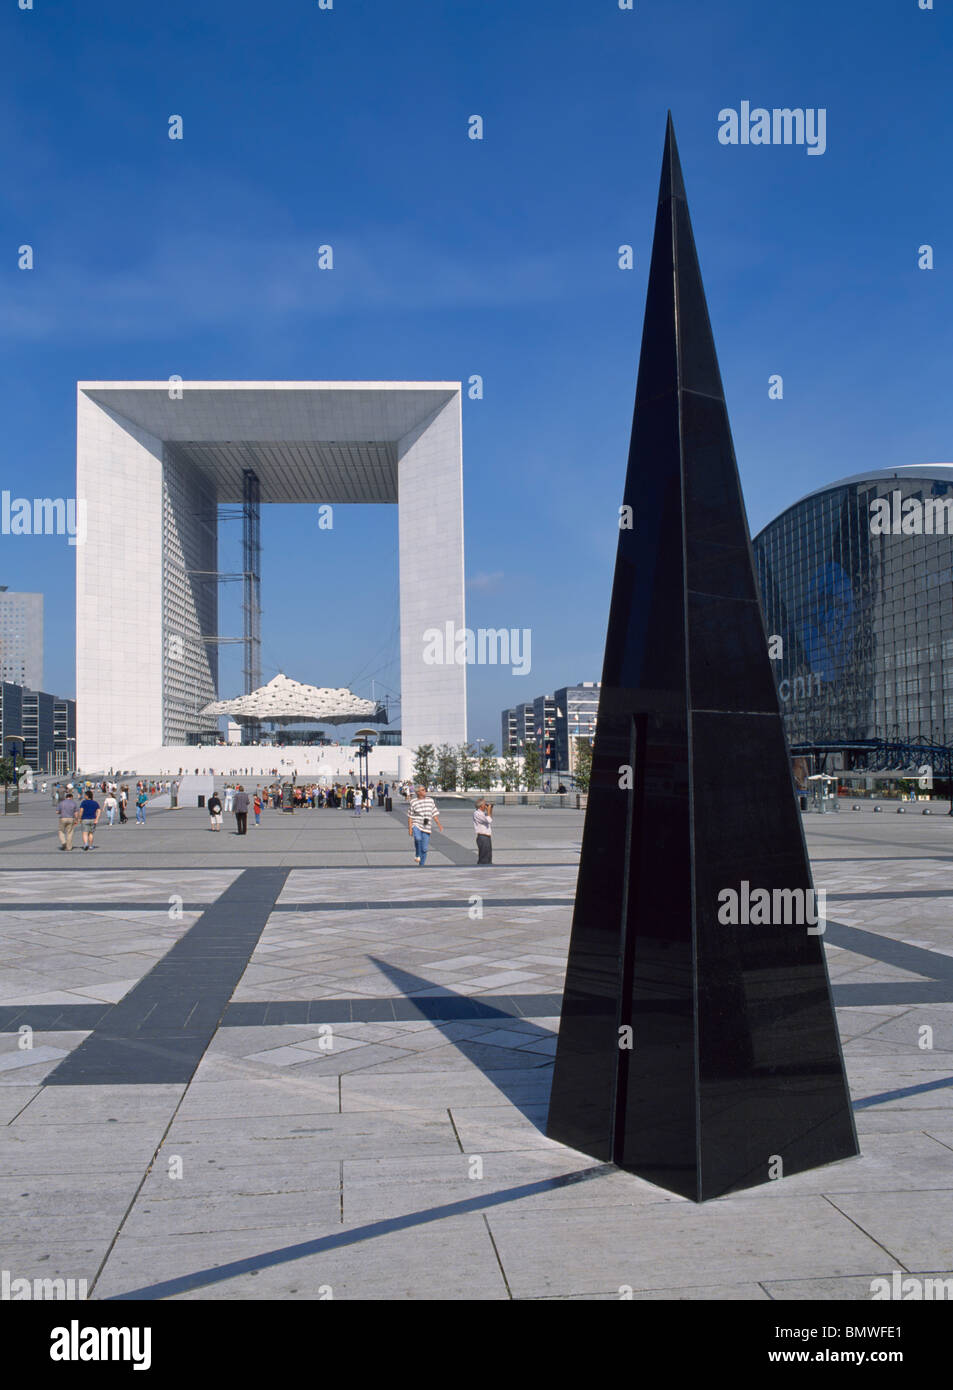 La Defense Grande Arche monument & part French government offices in modern business area with a black pyramid sculpture on the esplanade Paris France Stock Photo